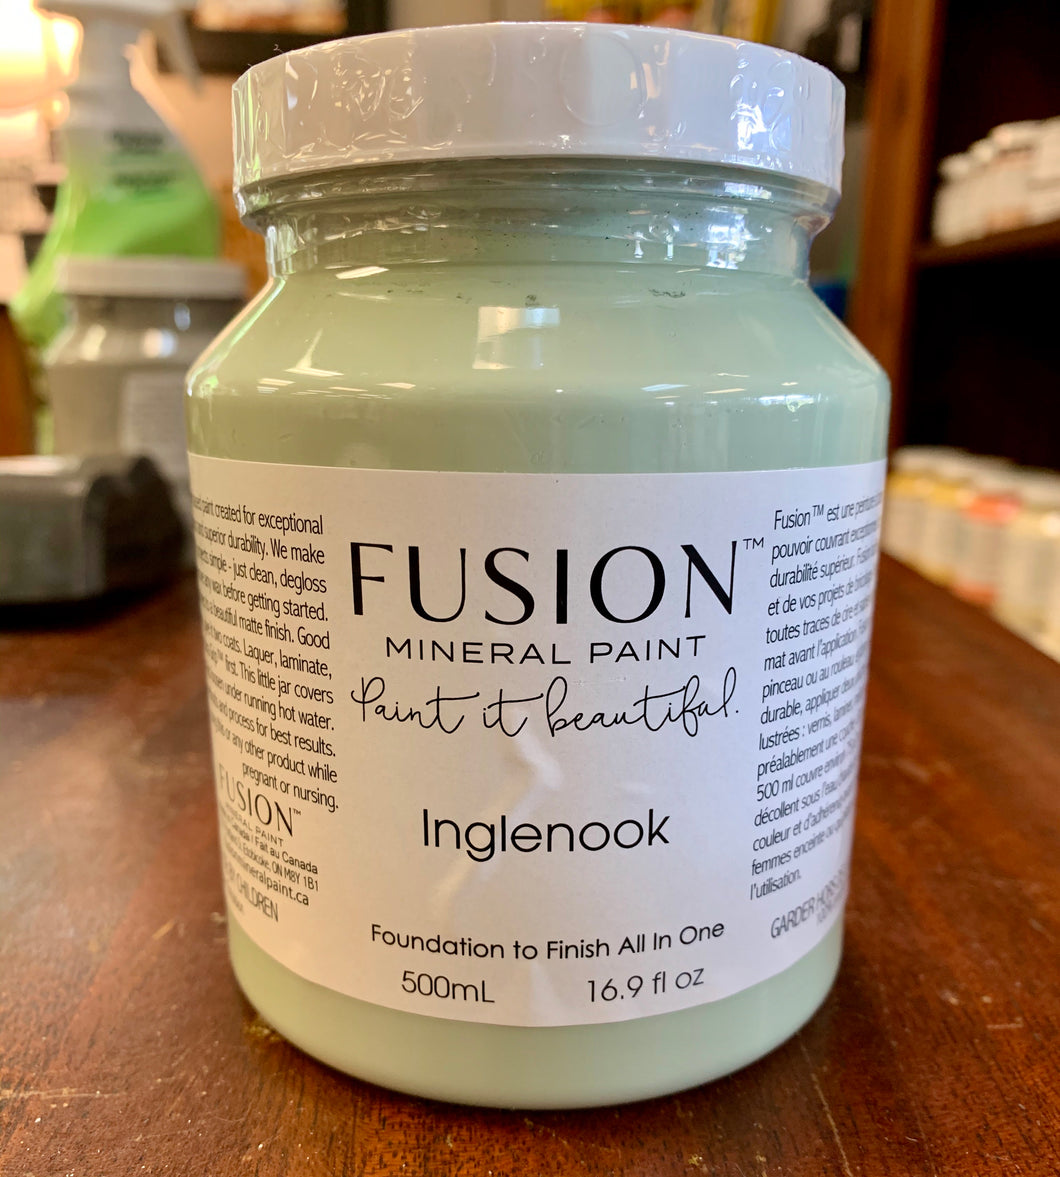 Fusion Mineral Paint in Inglenook